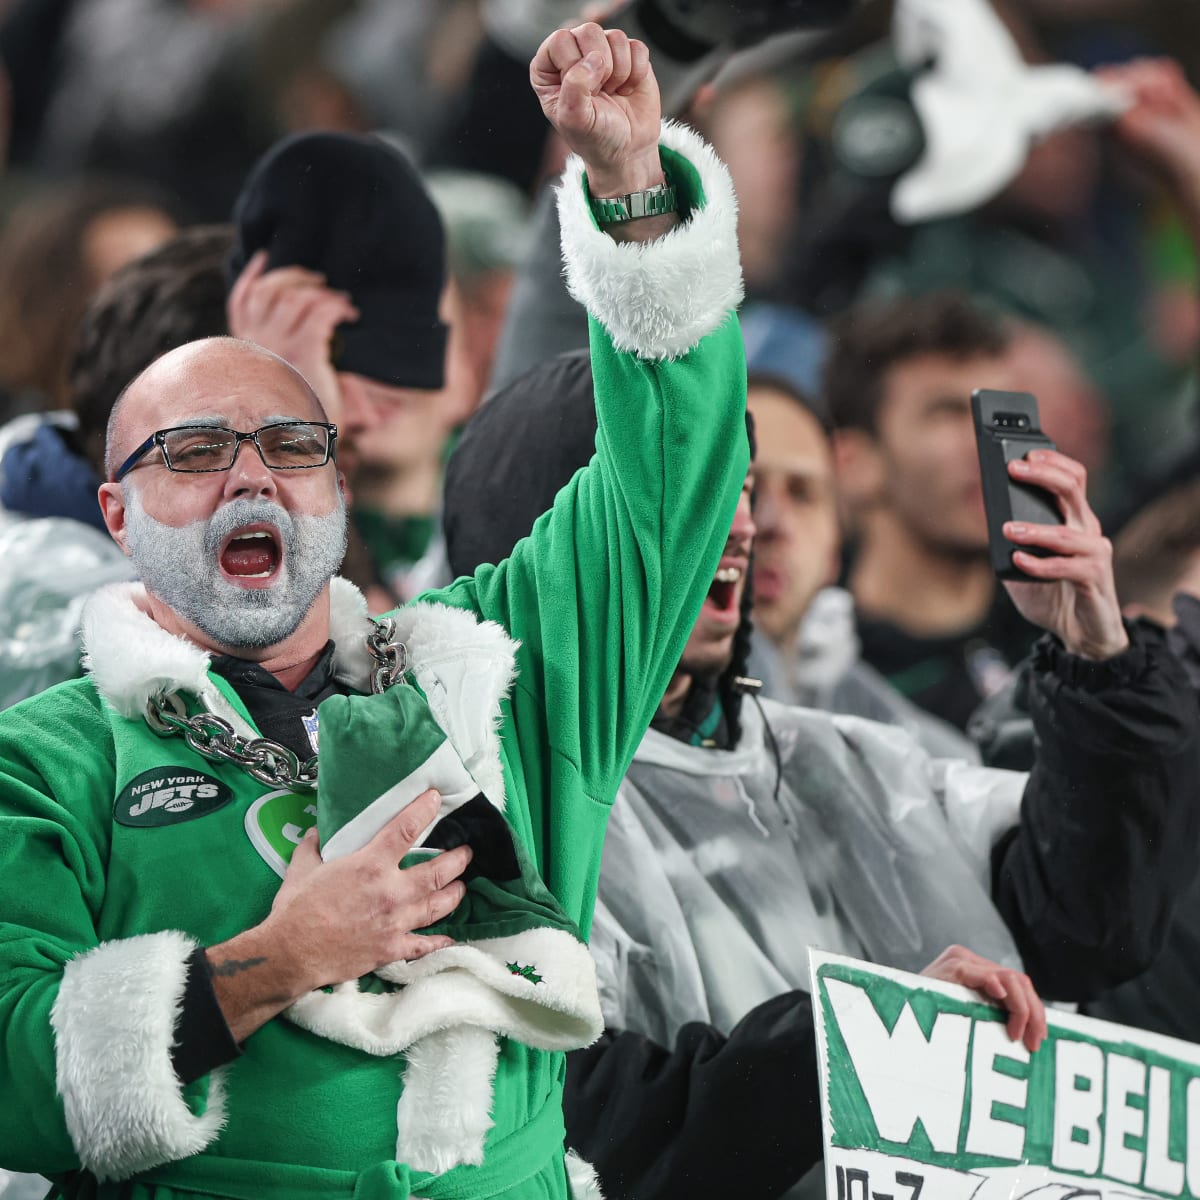 Get excited for the Jets Black Friday game with jerseys and gear